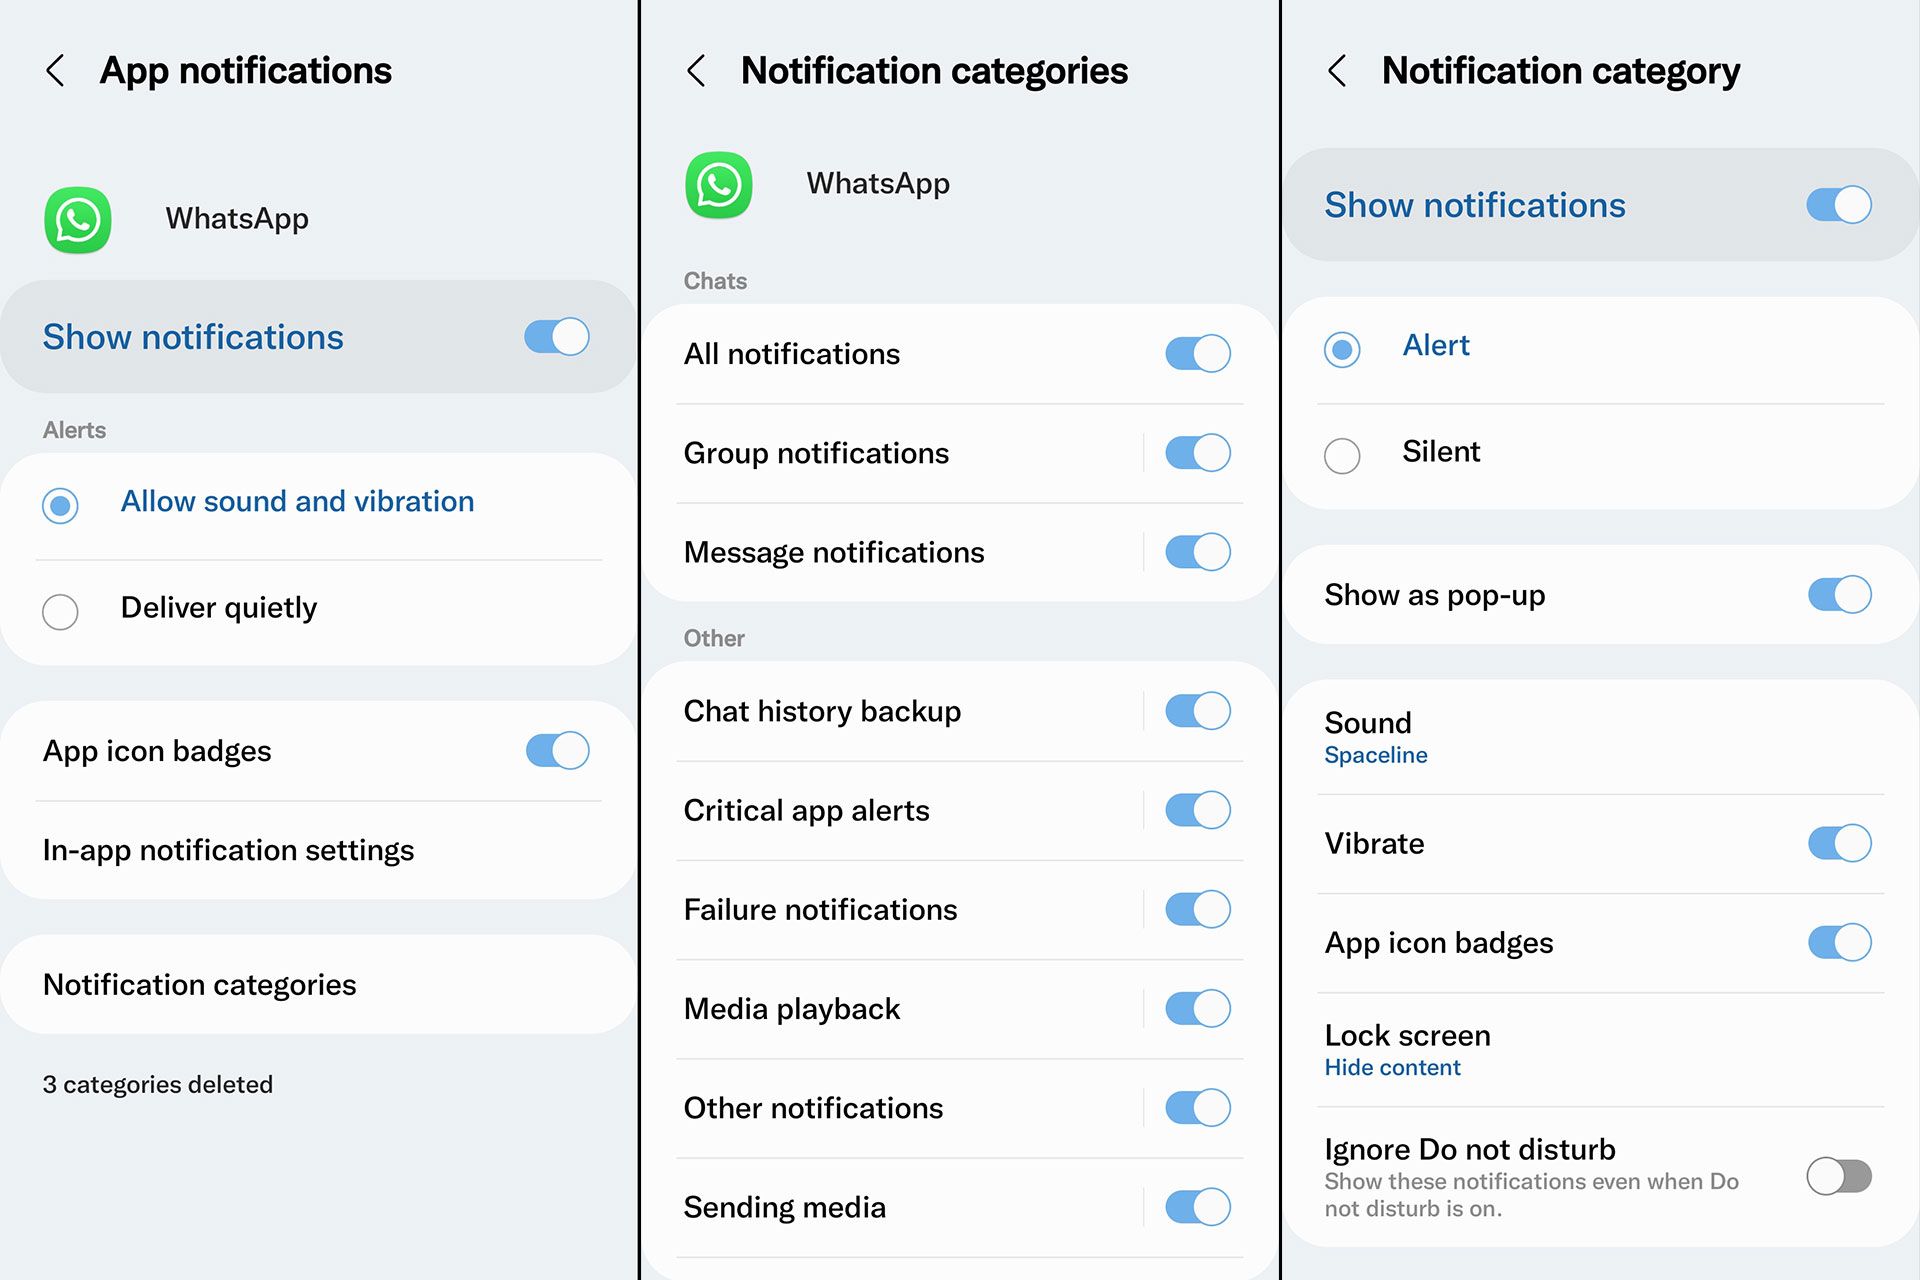 Personalize notifications in One UI